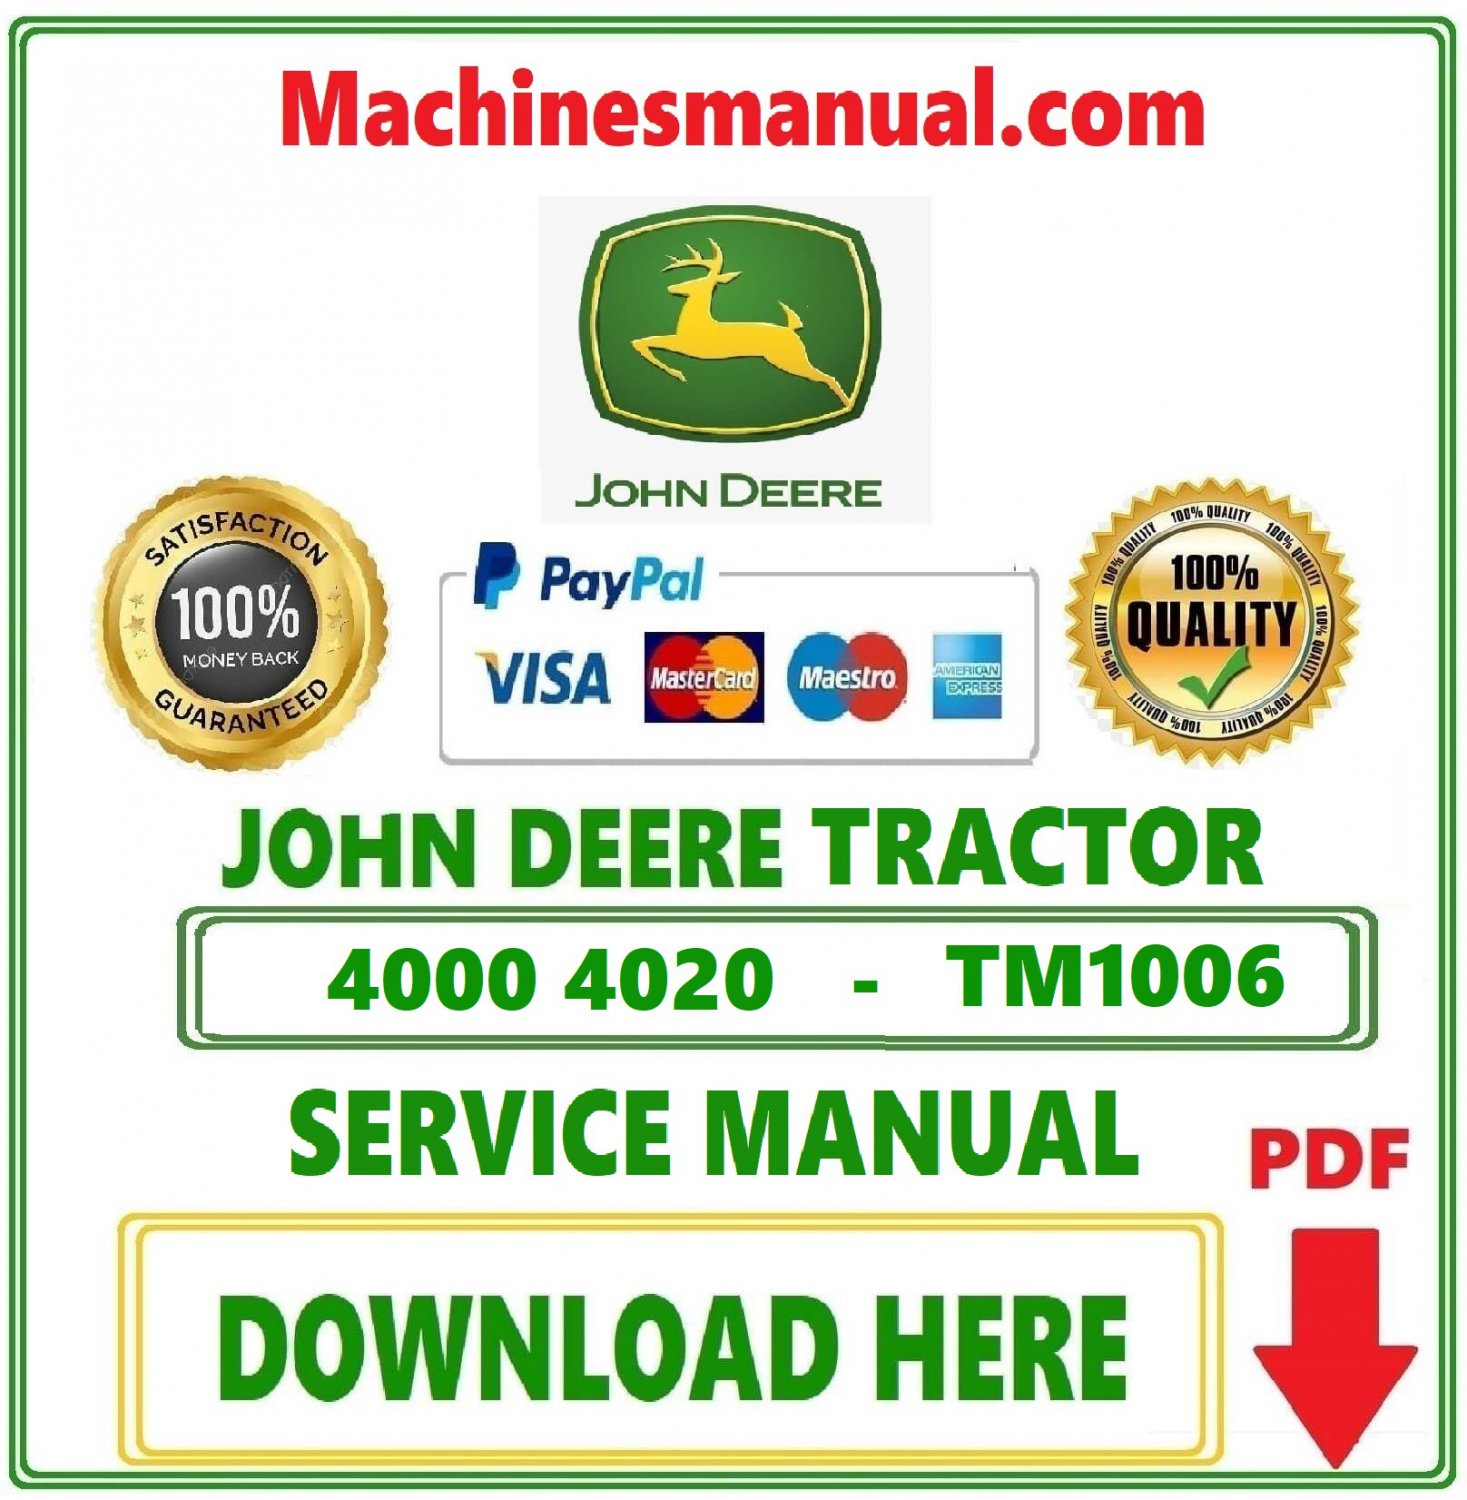 John Deere 4000 4020 Tractor Diagnostic Operation and Test Technical Service Repair Manual tm1006